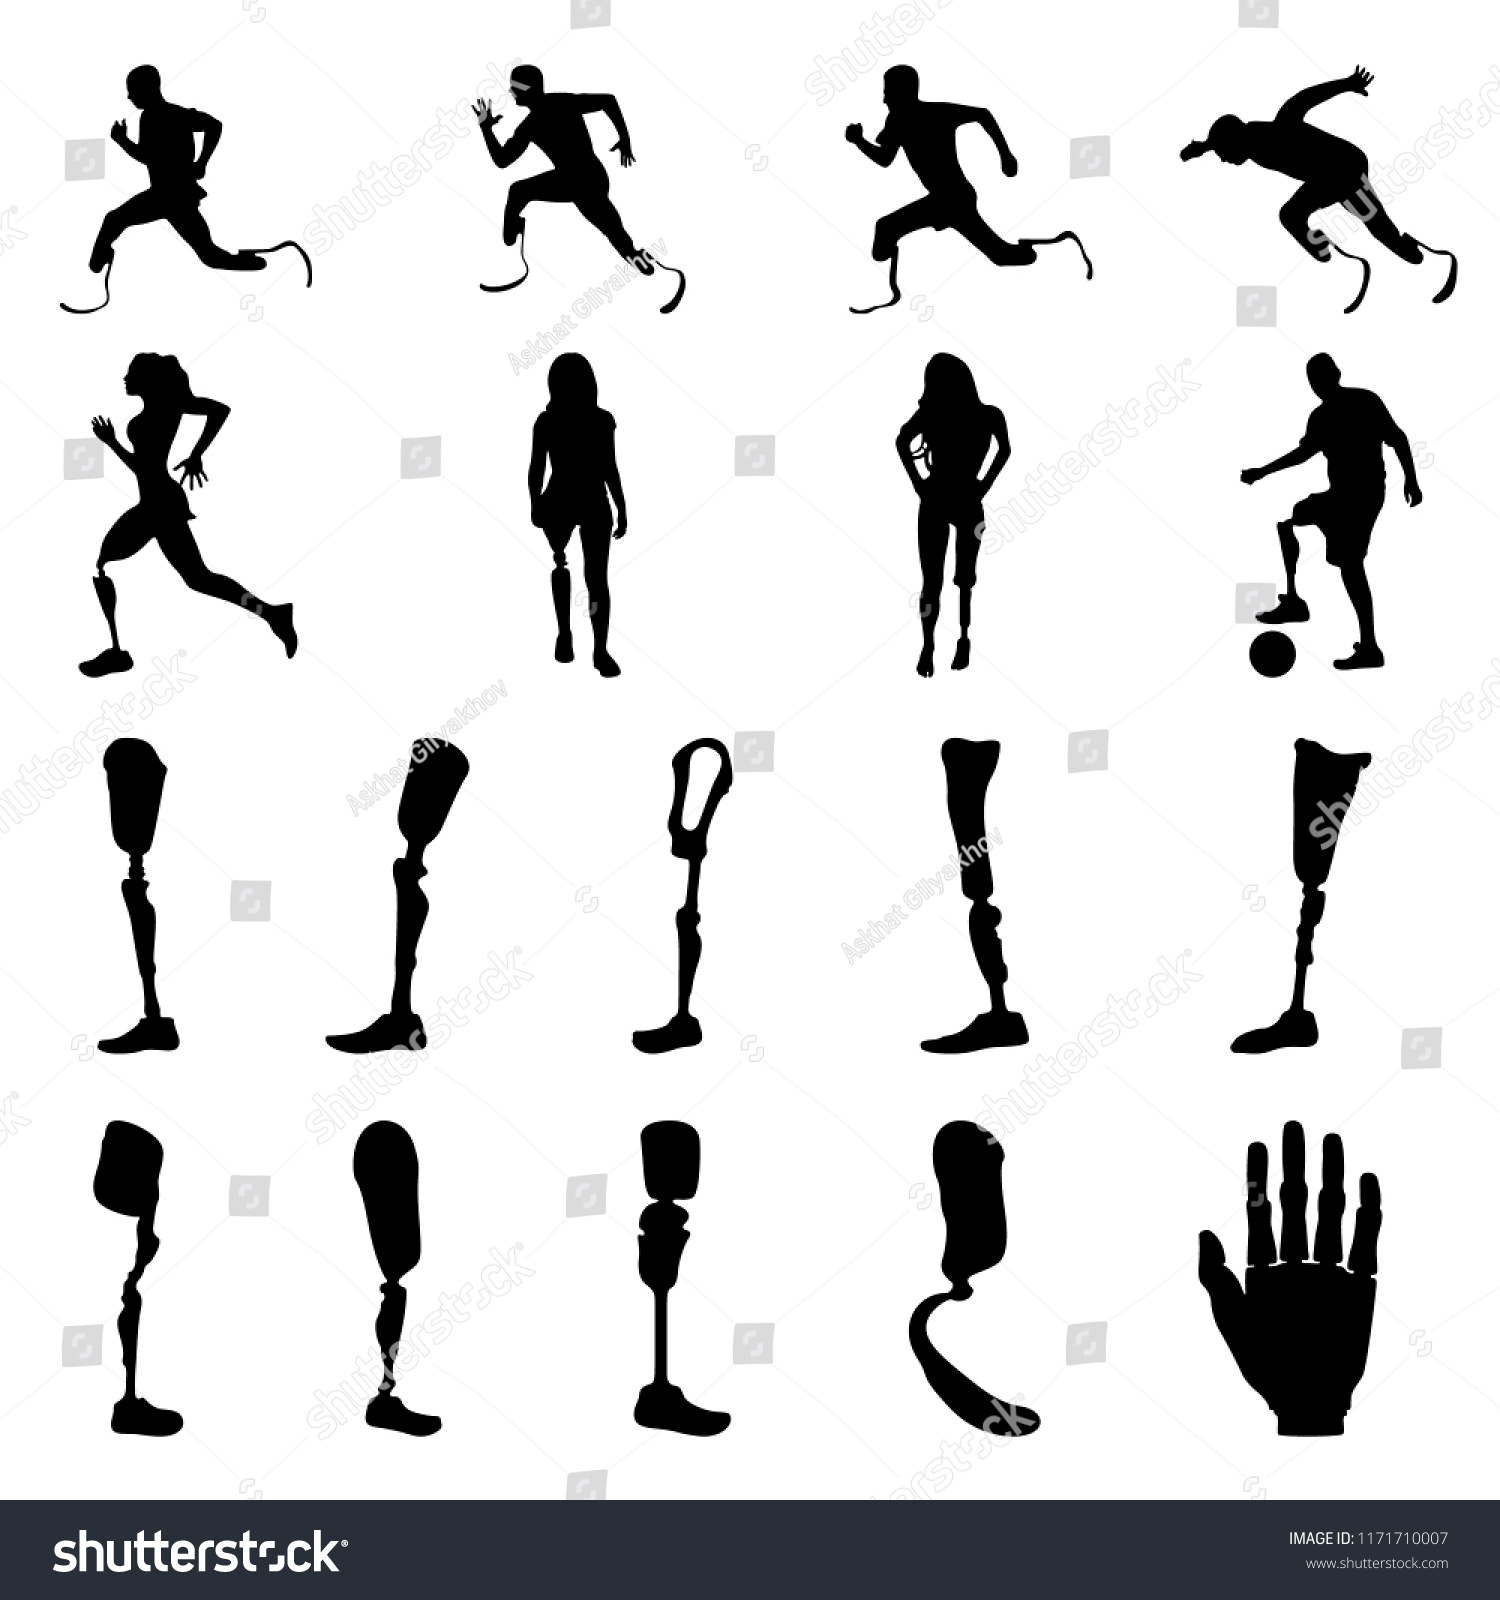 SVG of Silhouettes of amputee people with artificial limb. Silhouettes of prosthetic legs and arms. Vector. svg